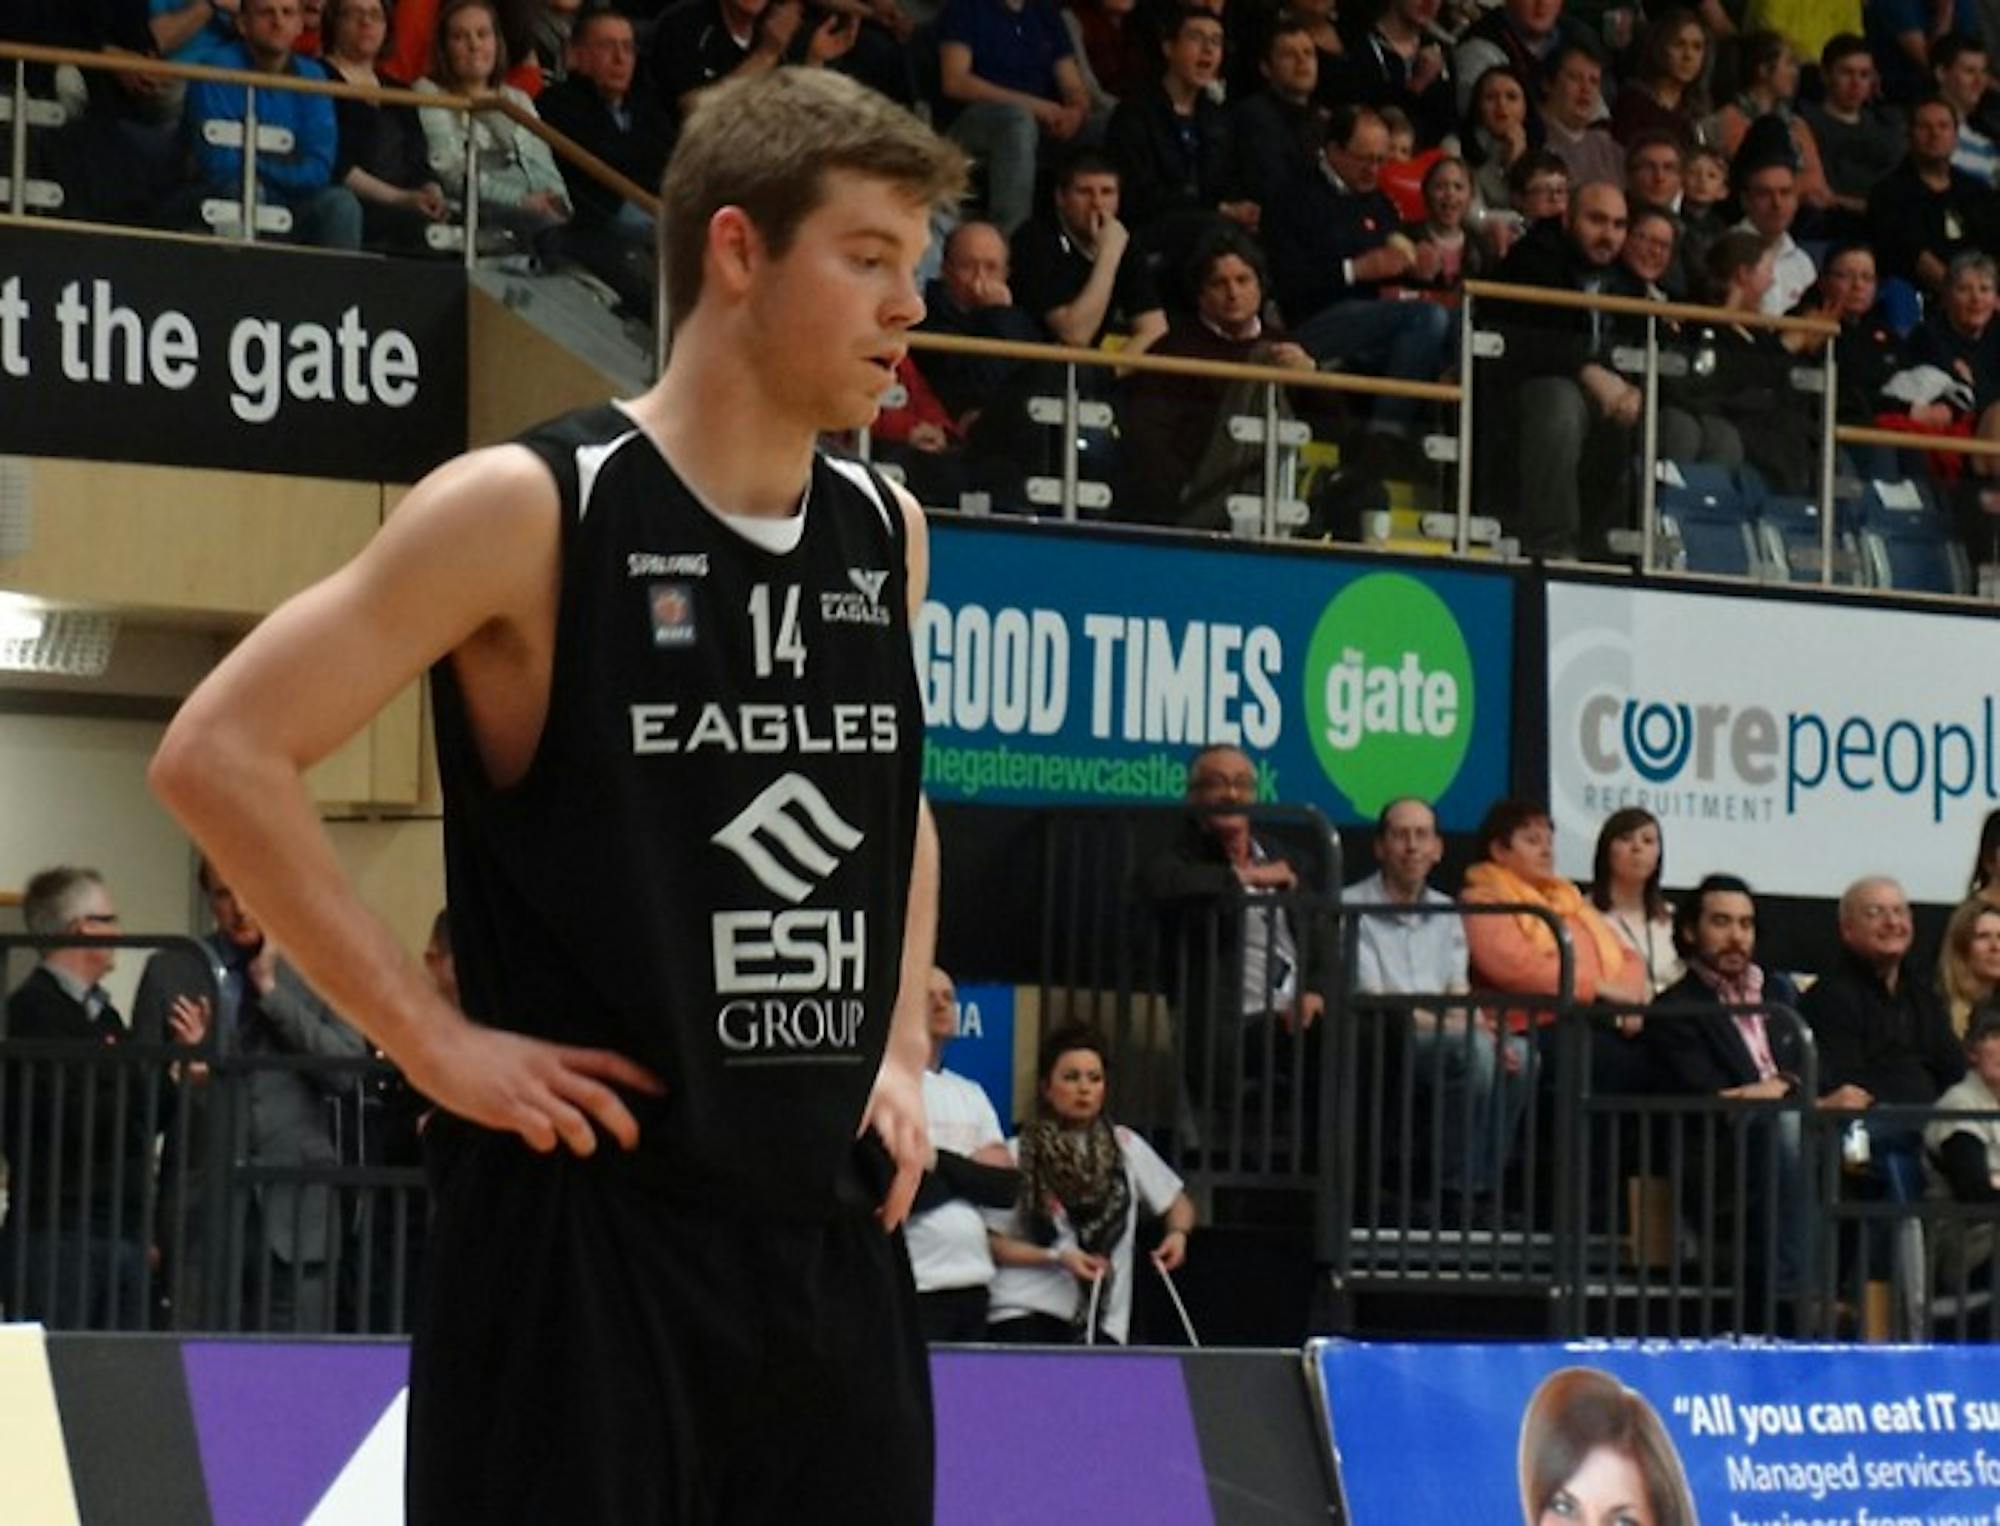 Former Irish guard Scott Martin, now playing for the Esh Group Eagles Newcastle in the British Basketball League, is averaging 16.0 points and 9.8 rebounds per game in his first professional season.